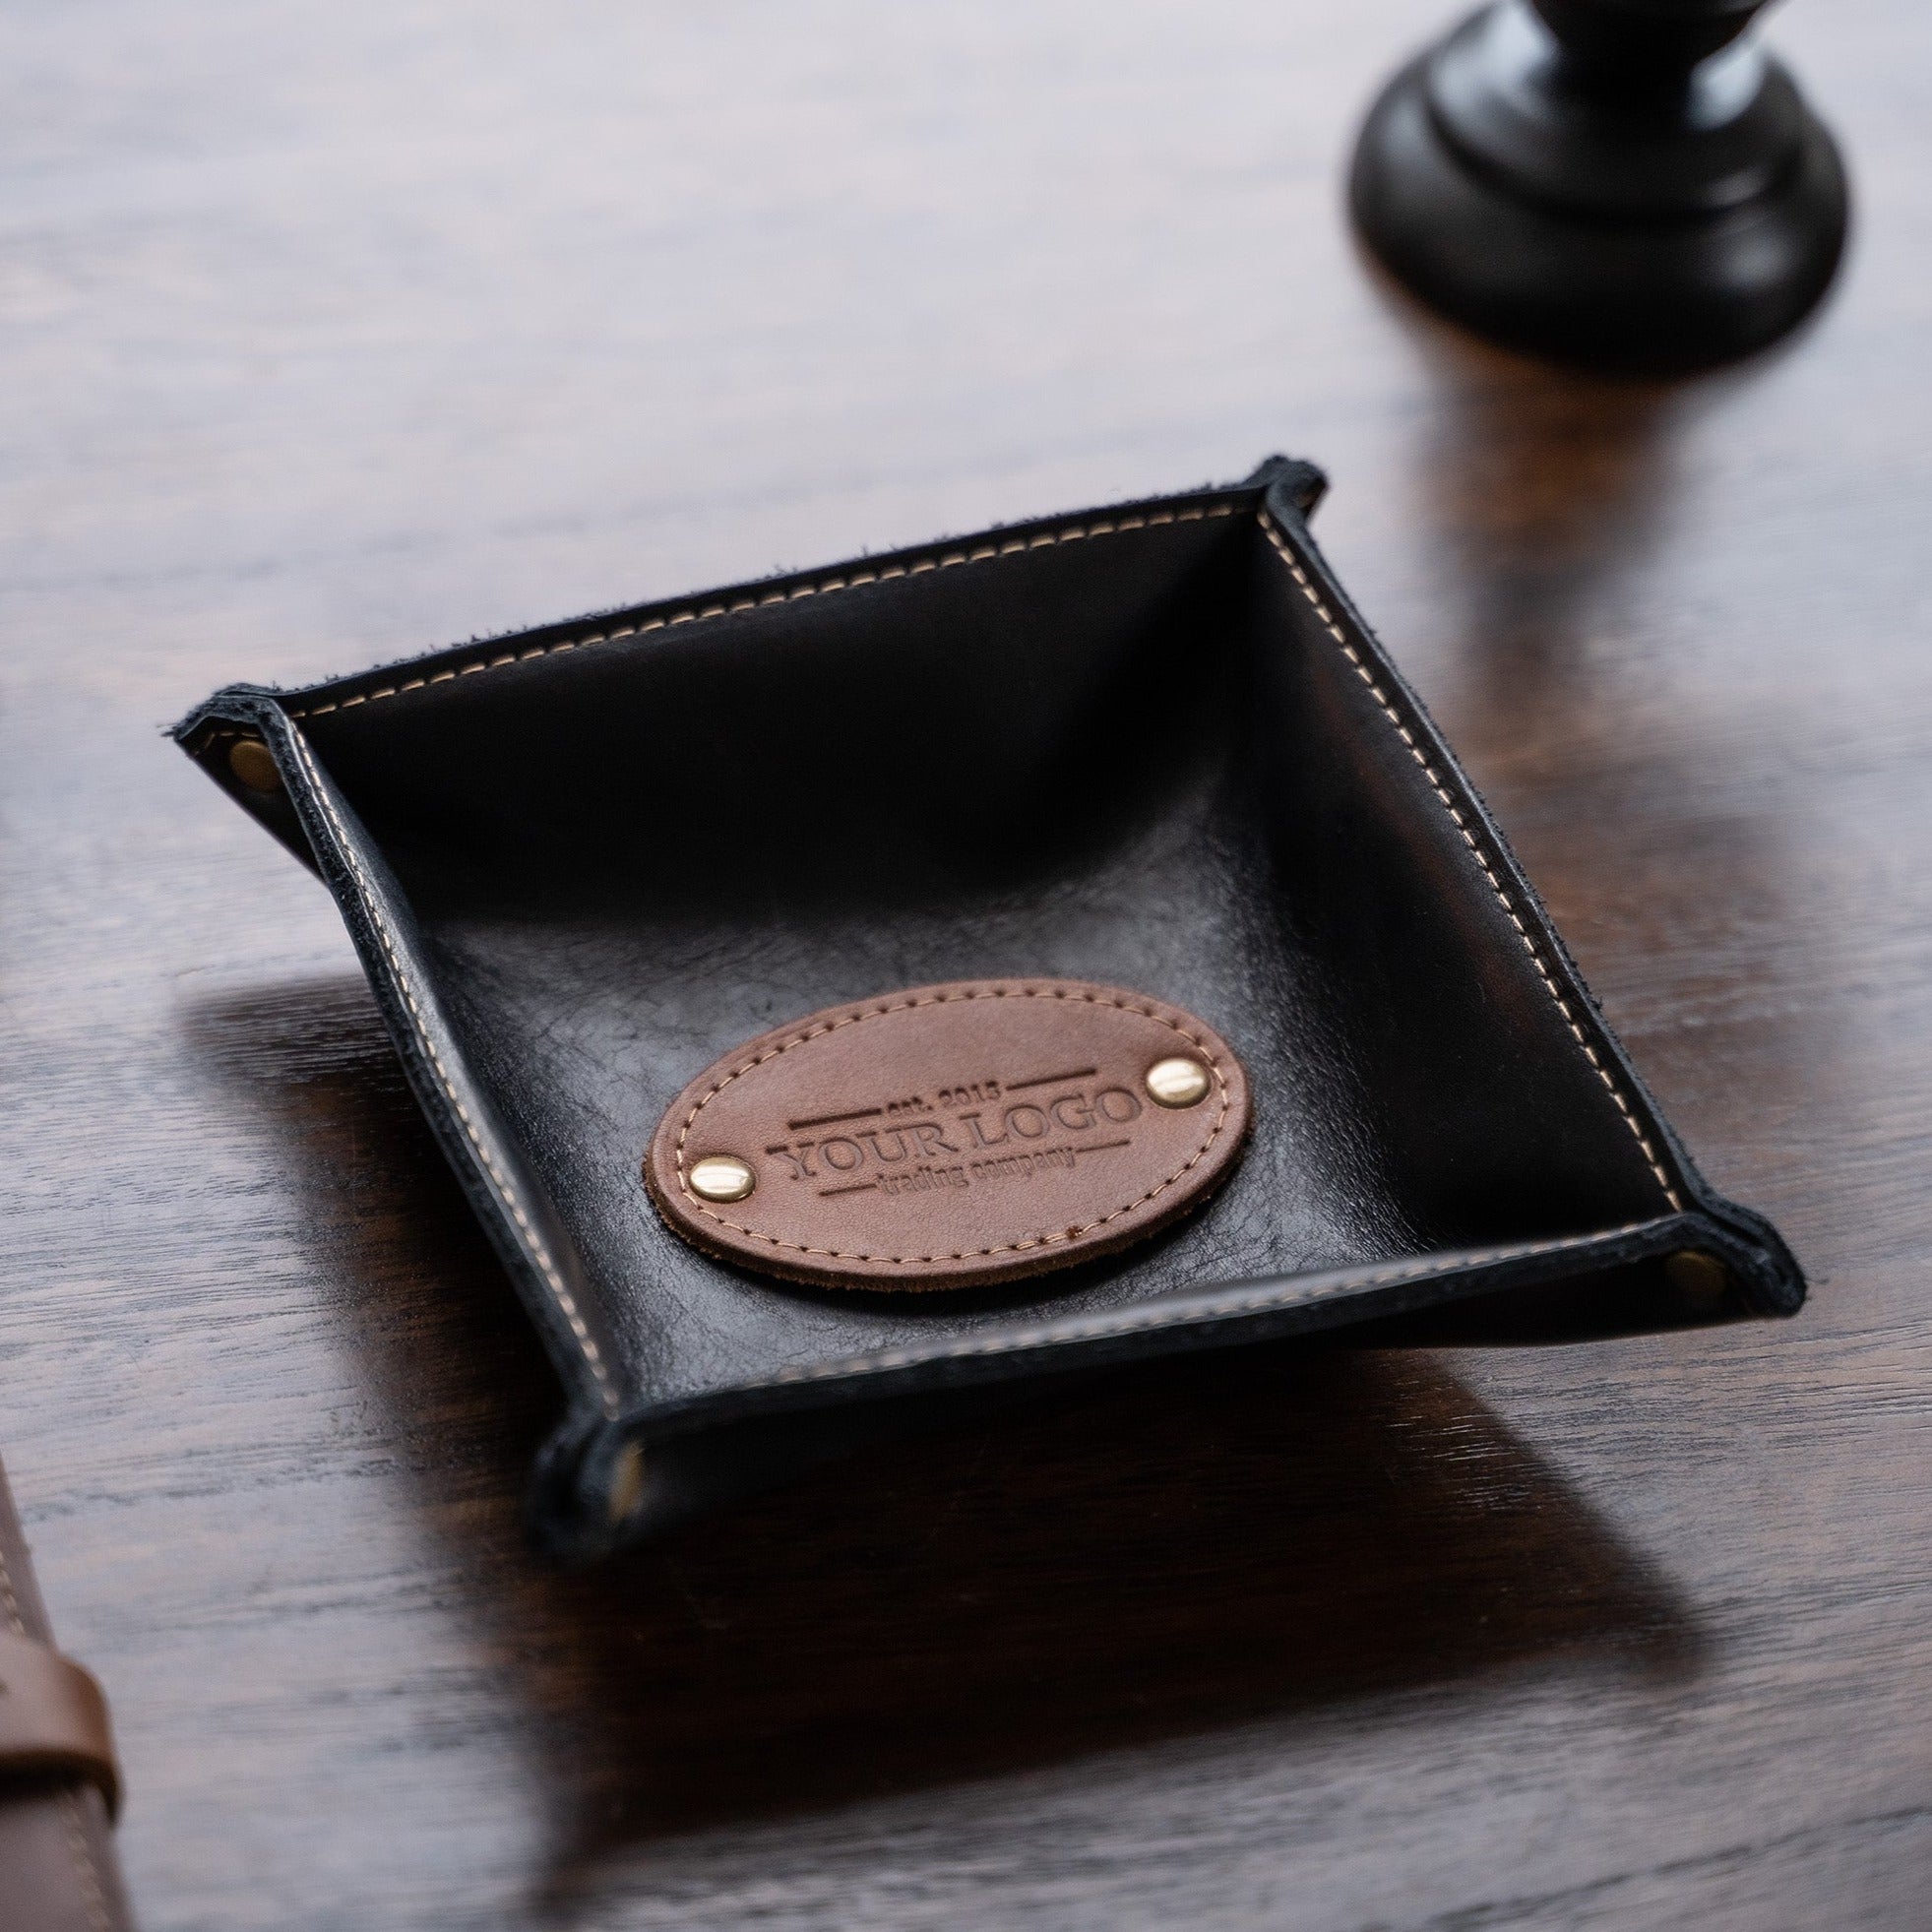 Repurposed Luxury & Custom Leather Accessories - The Leather Laundry